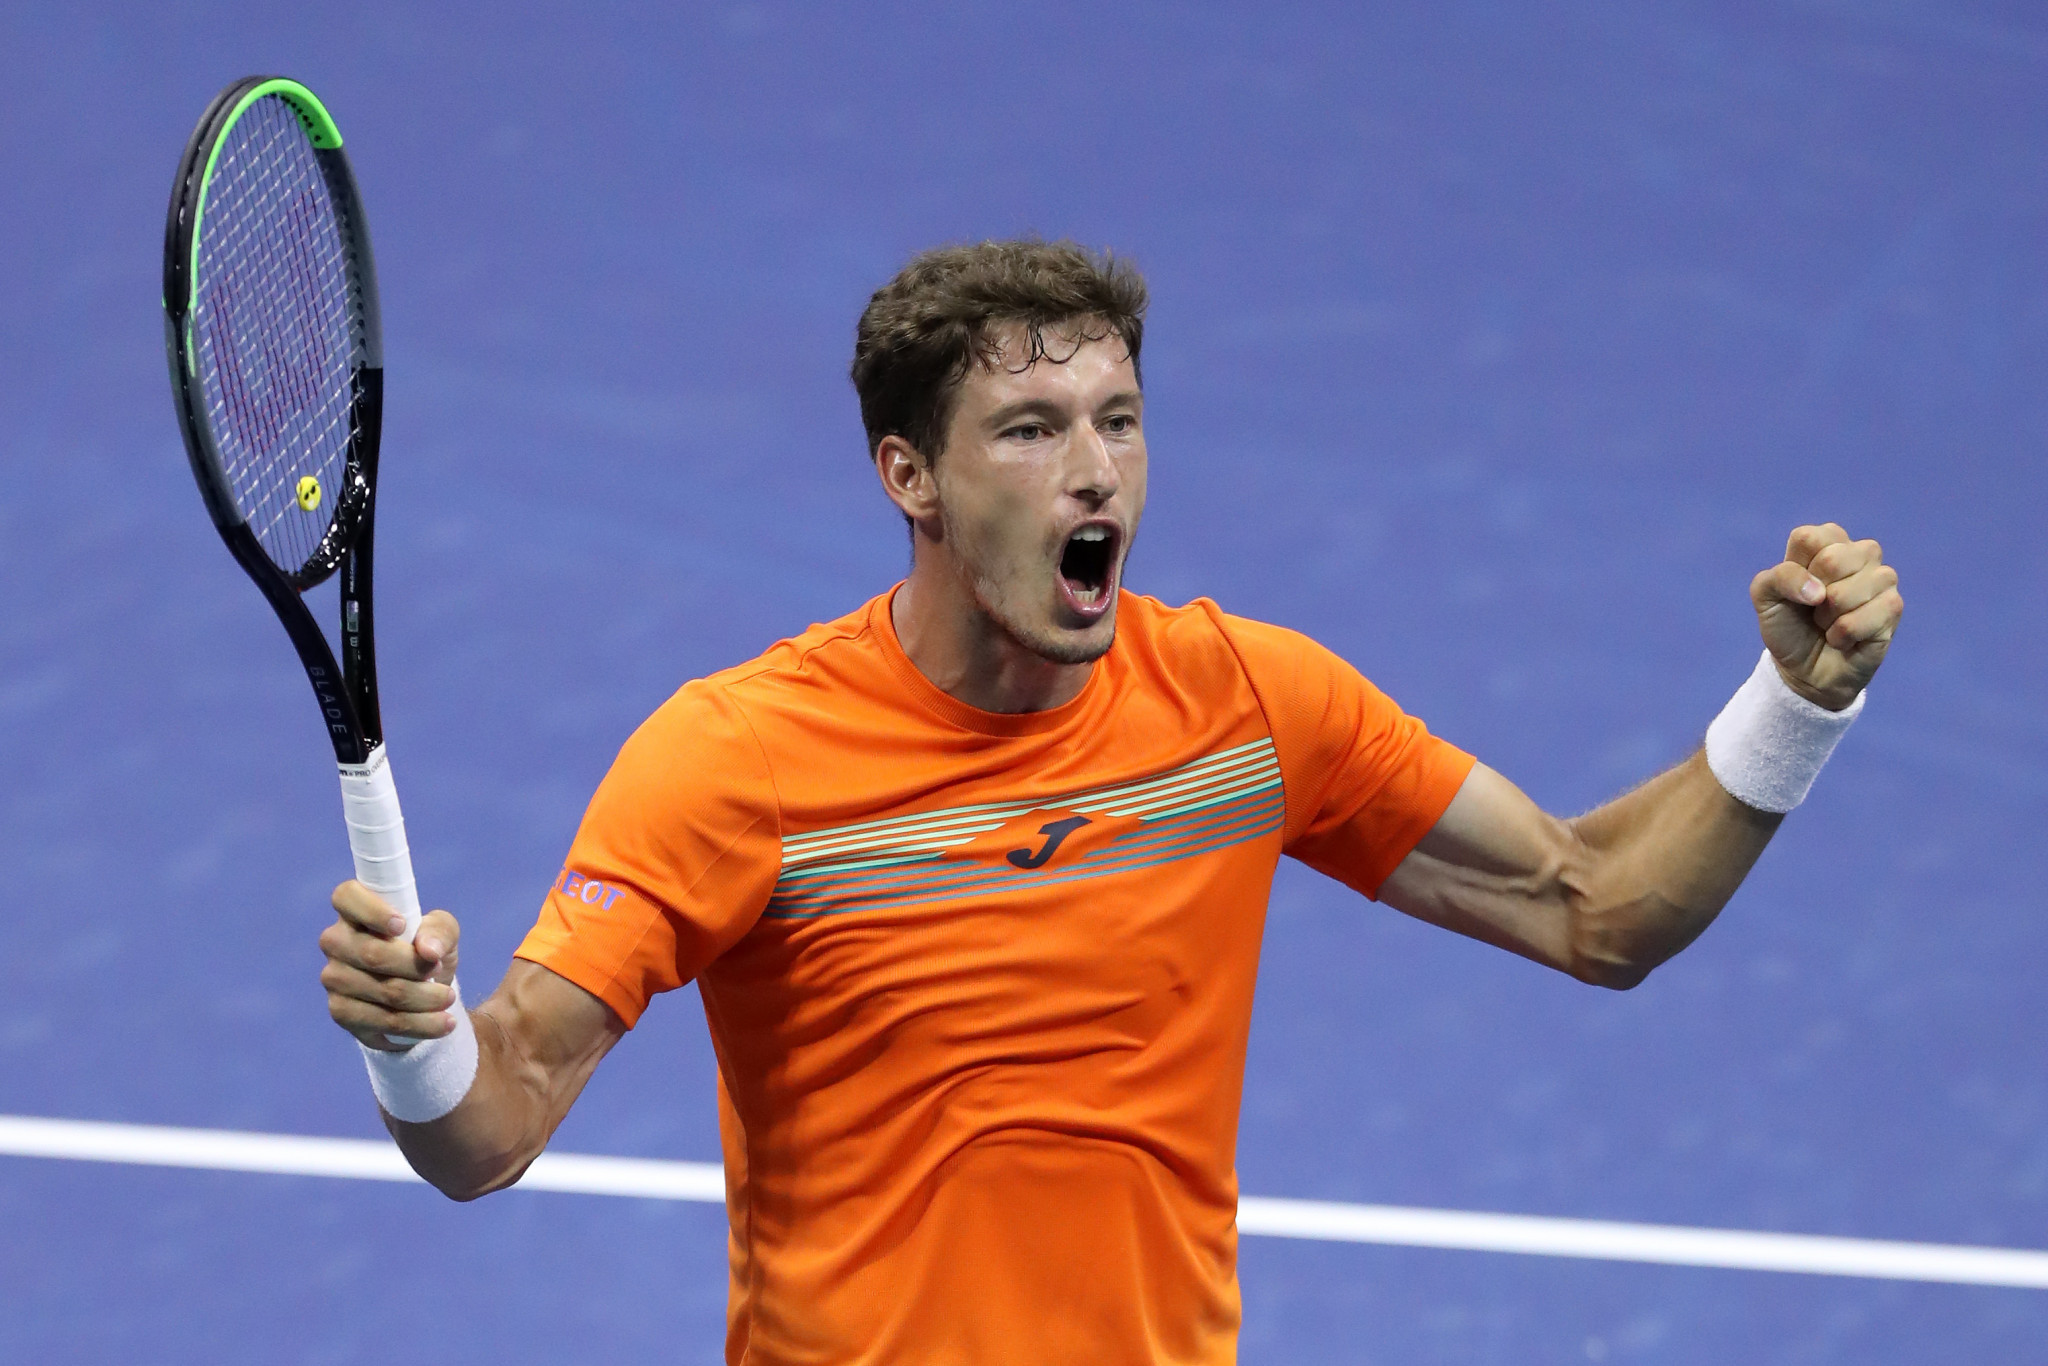 Spain's Pablo Carreno Busta reached the last four after an epic five set victory against Canada's Denis Shapovalov ©Getty Images